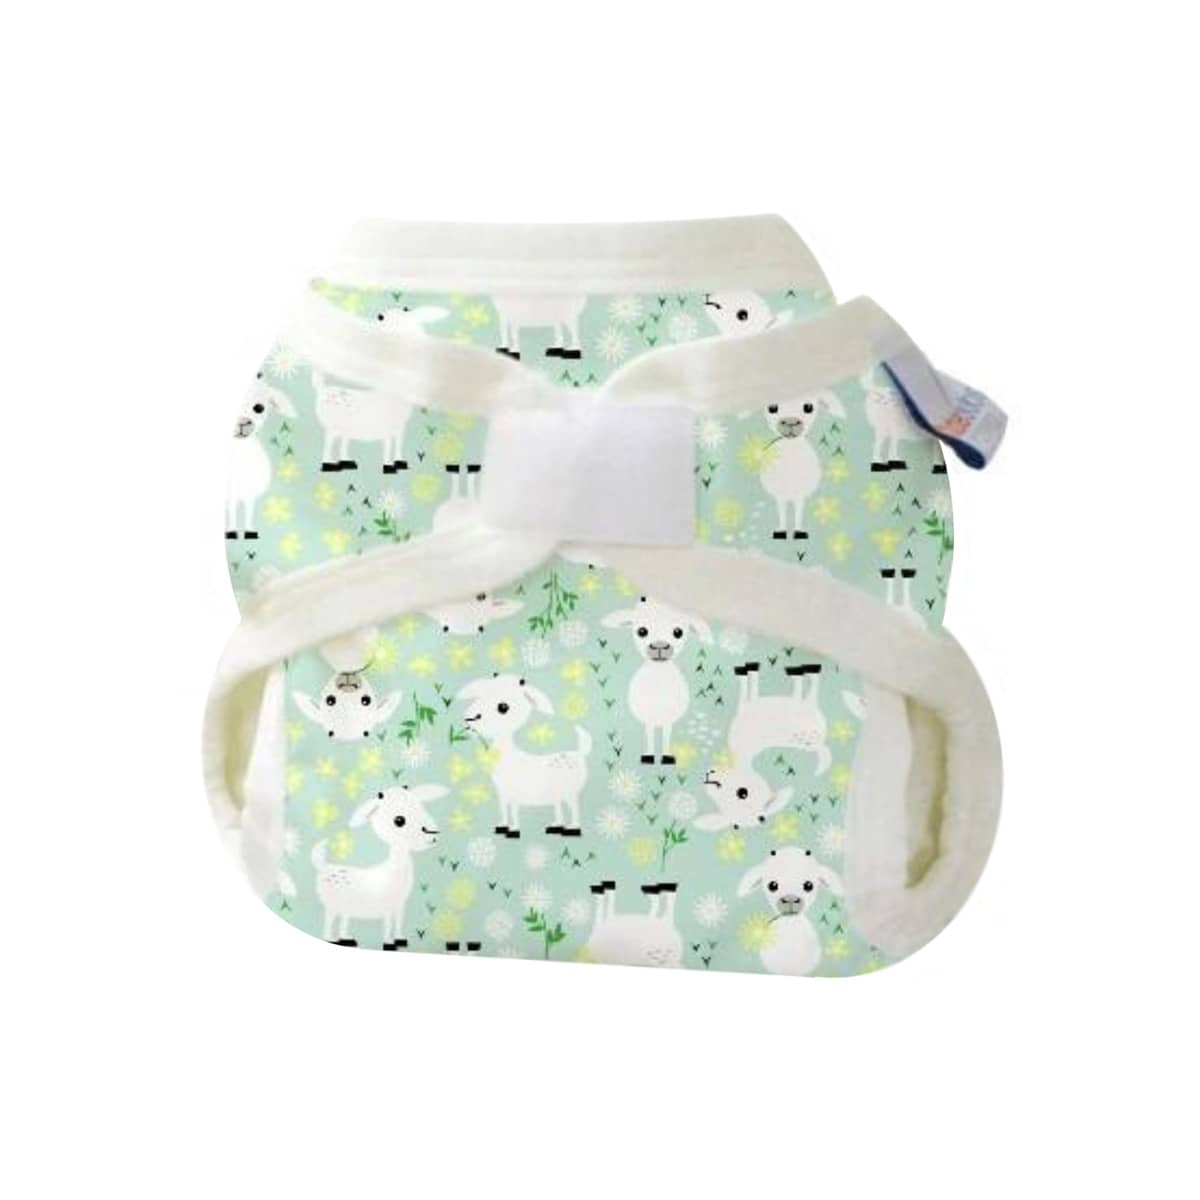 Bubblebubs PUL Gusseted Nappy Cover - Goat-E Small